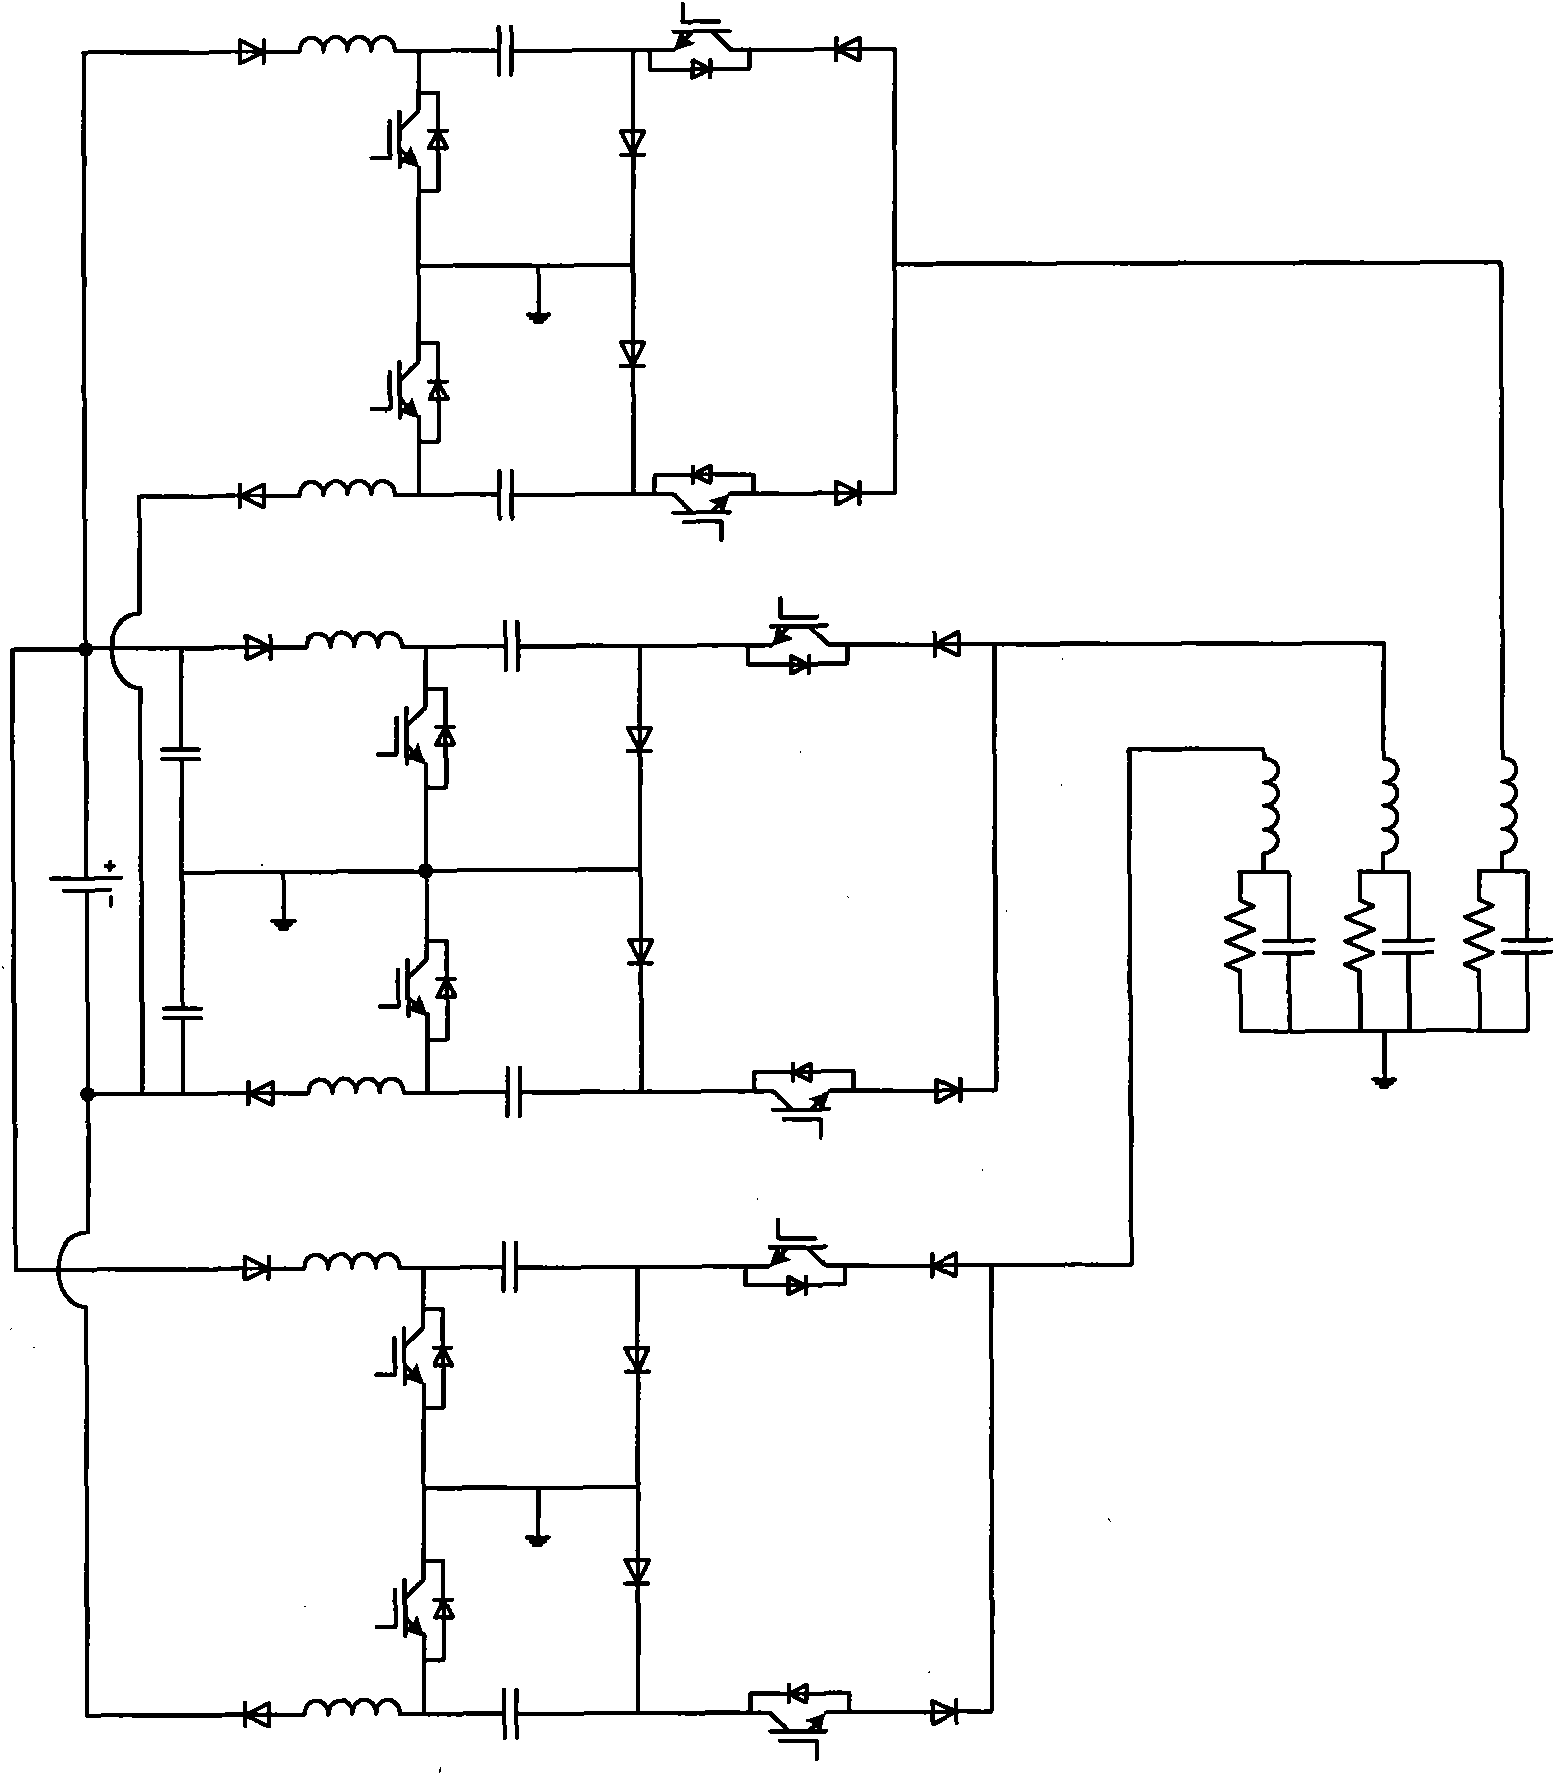 Double-Cuk buck-boost output parallel-type converter